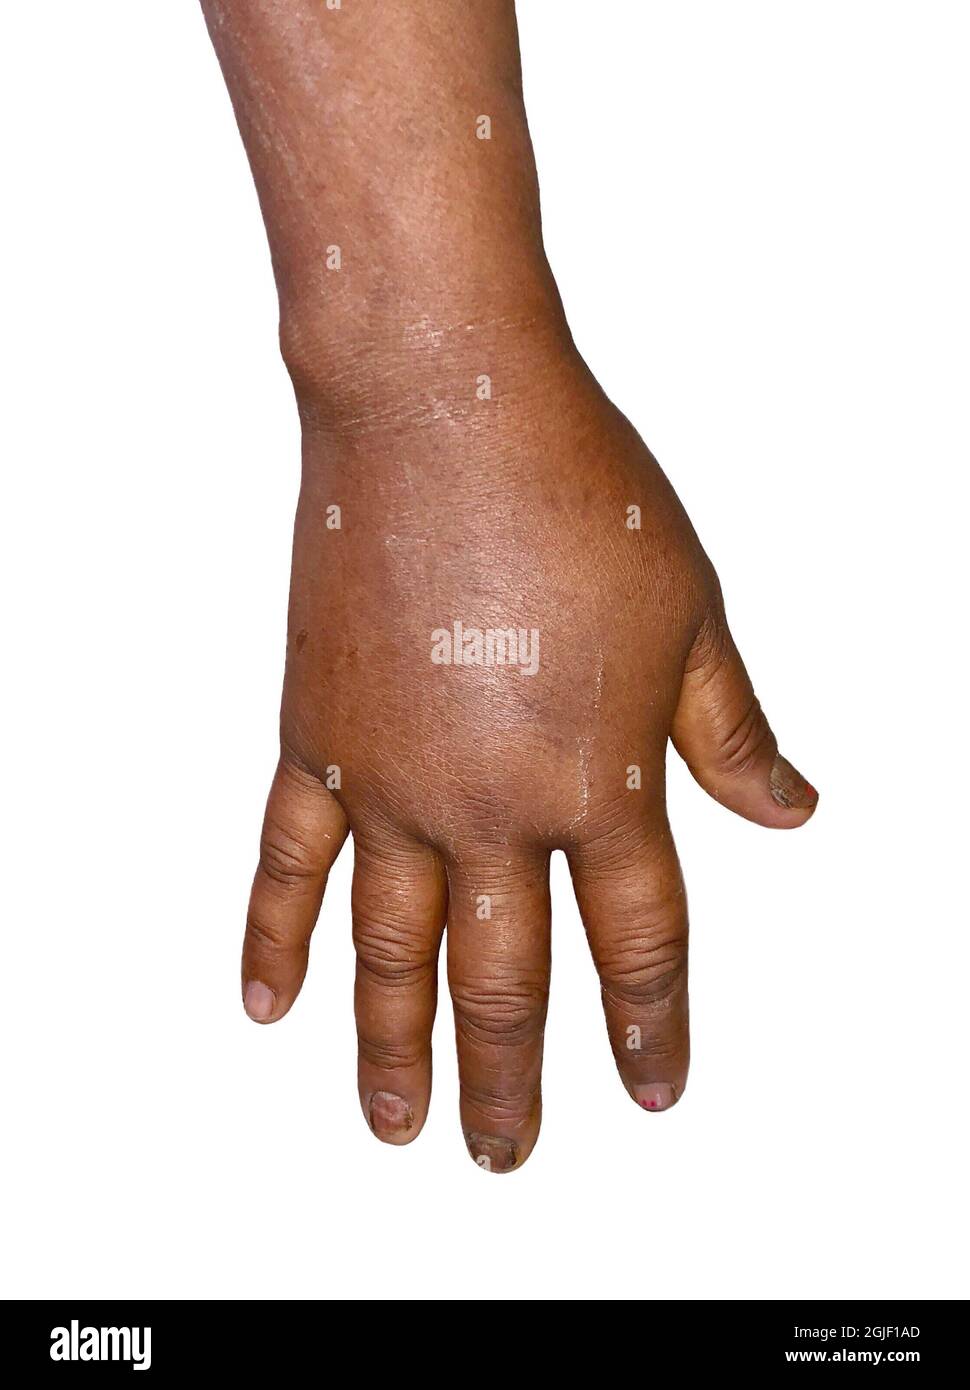 Unilateral edema of upper limb. Swollen hand and arm of Asian woman. Closeup view. Stock Photo